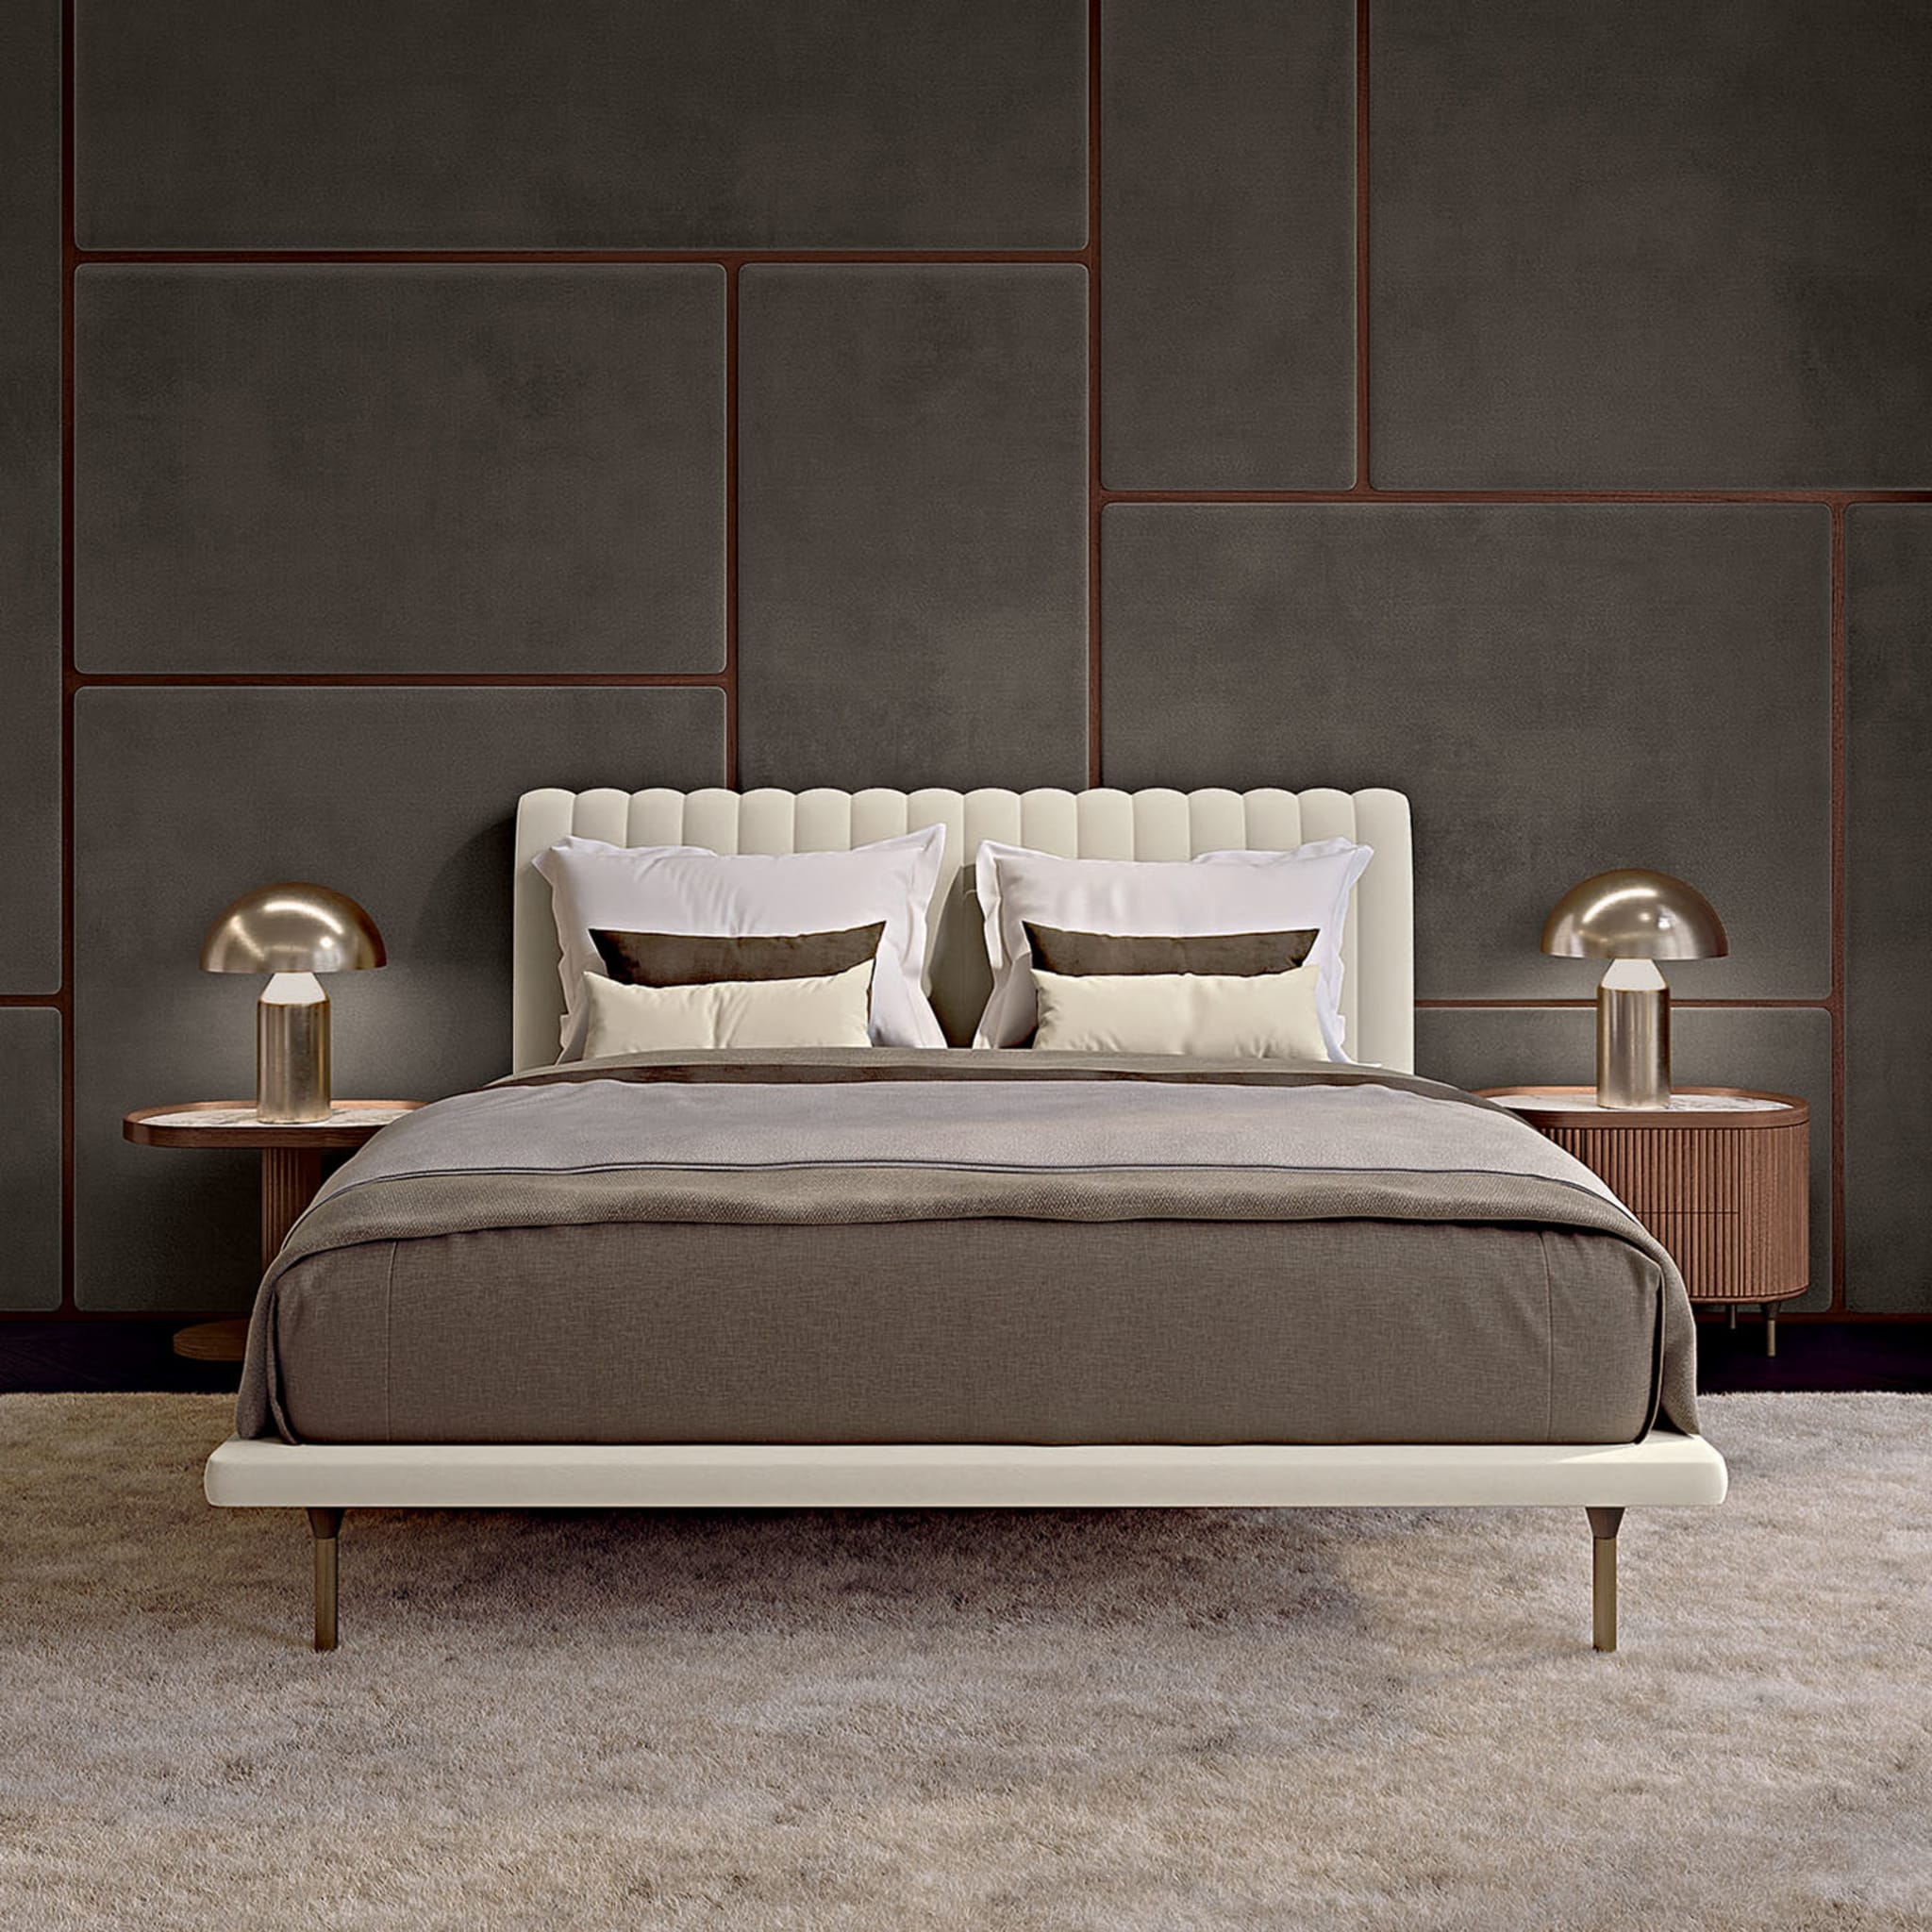 Opale Small Channeled Beige Double Bed - Alternative view 1